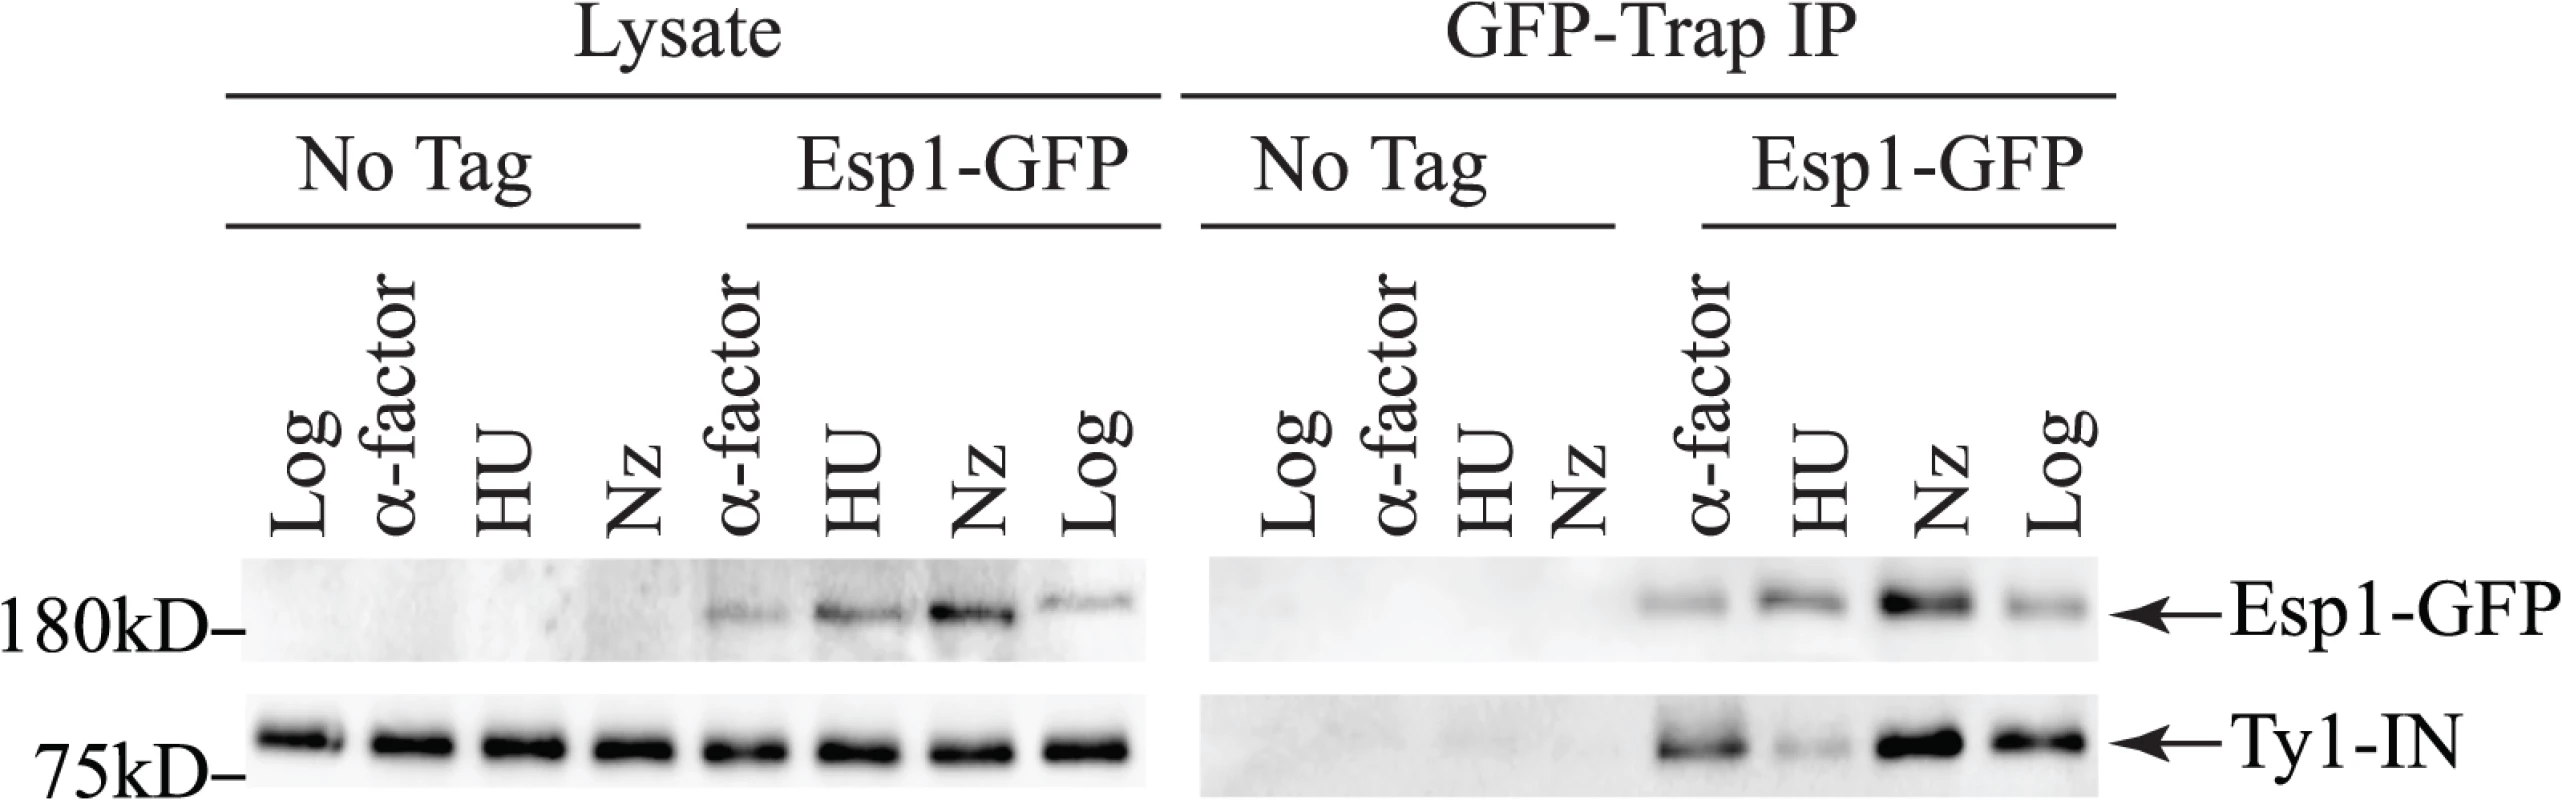 Esp1 interacts with Ty1-IN in G1 and G2/M phase cells.